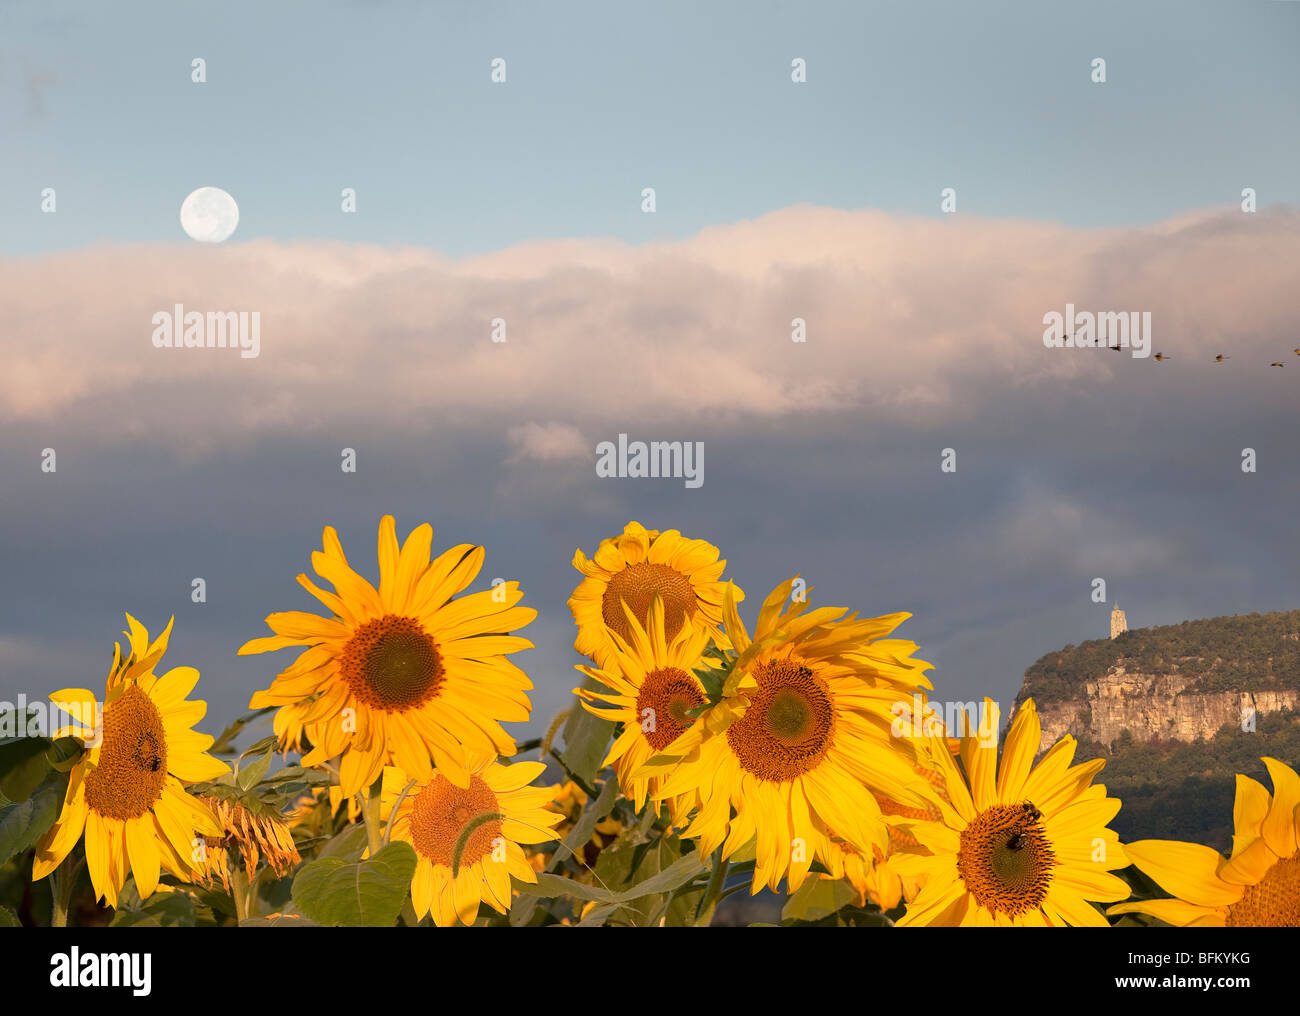 The moon sets near the Mohonk Tower as sunflowers planted by a local farmer face east at sunrise along Rt 299, New Paltz, NY Stock Photo